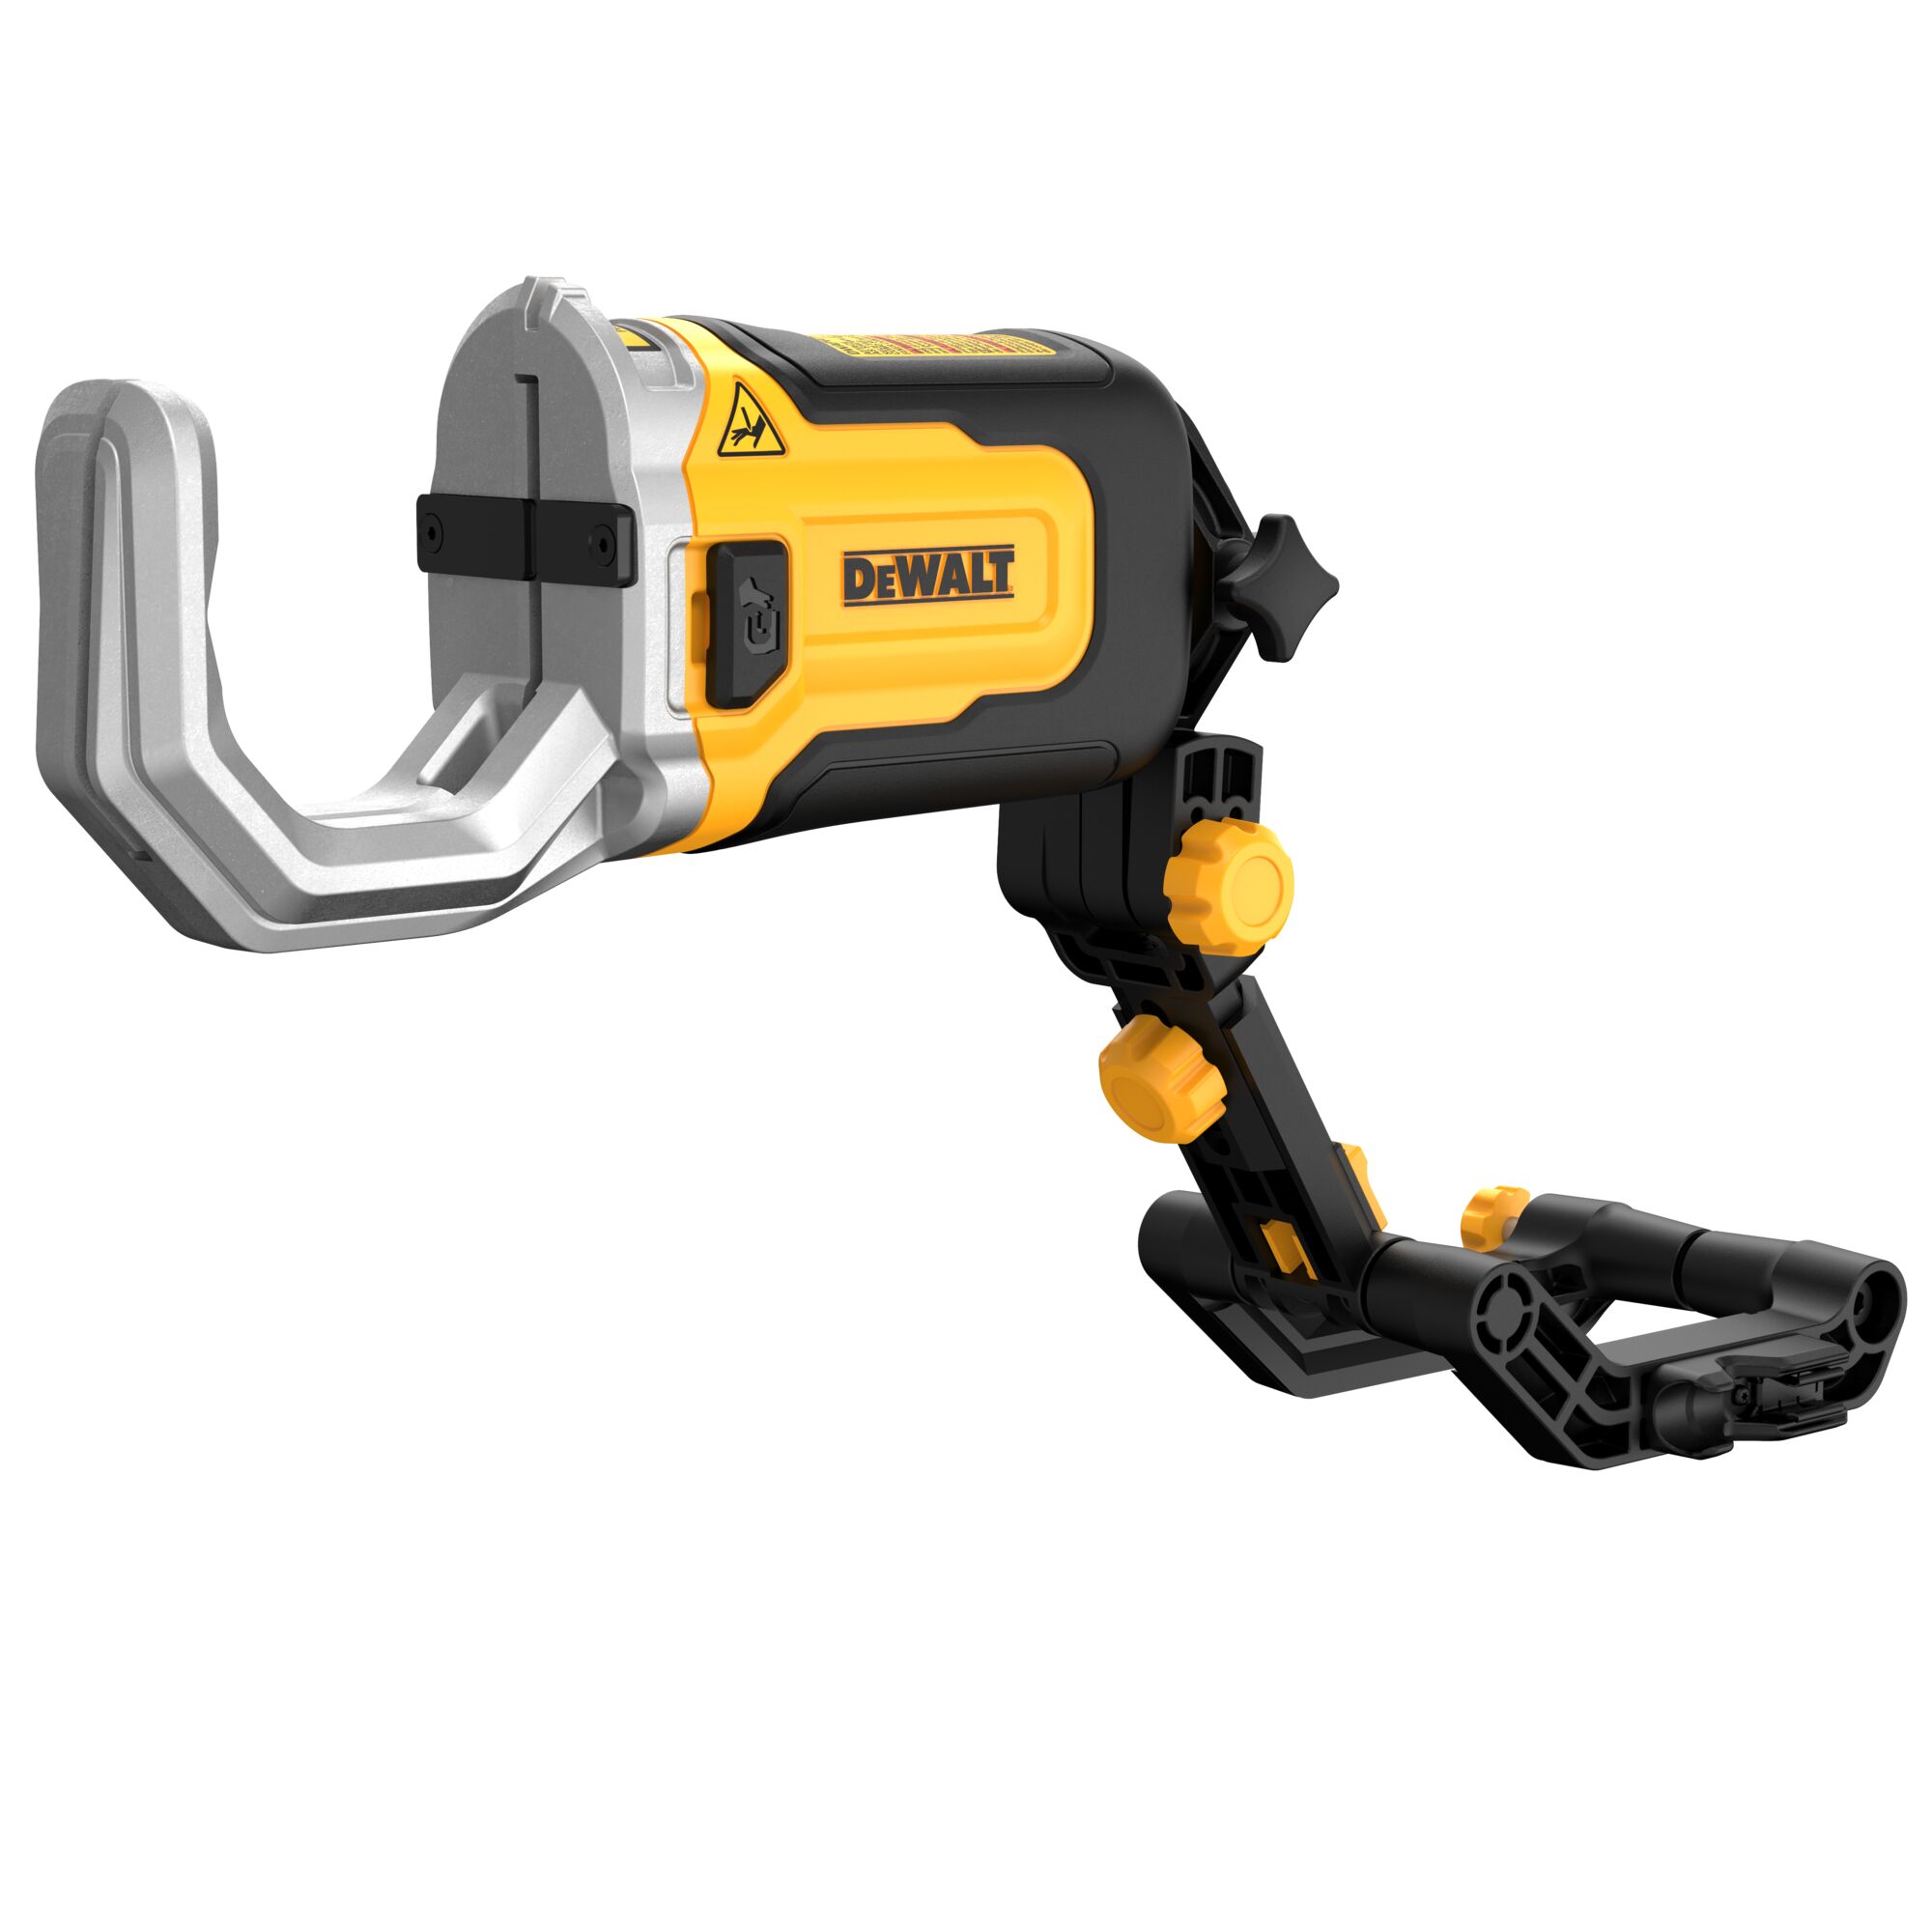 BREAKING! New Tools ANNOUNCED from DeWALT, Makita, Ryobi and more! It's the  Tool Show! 